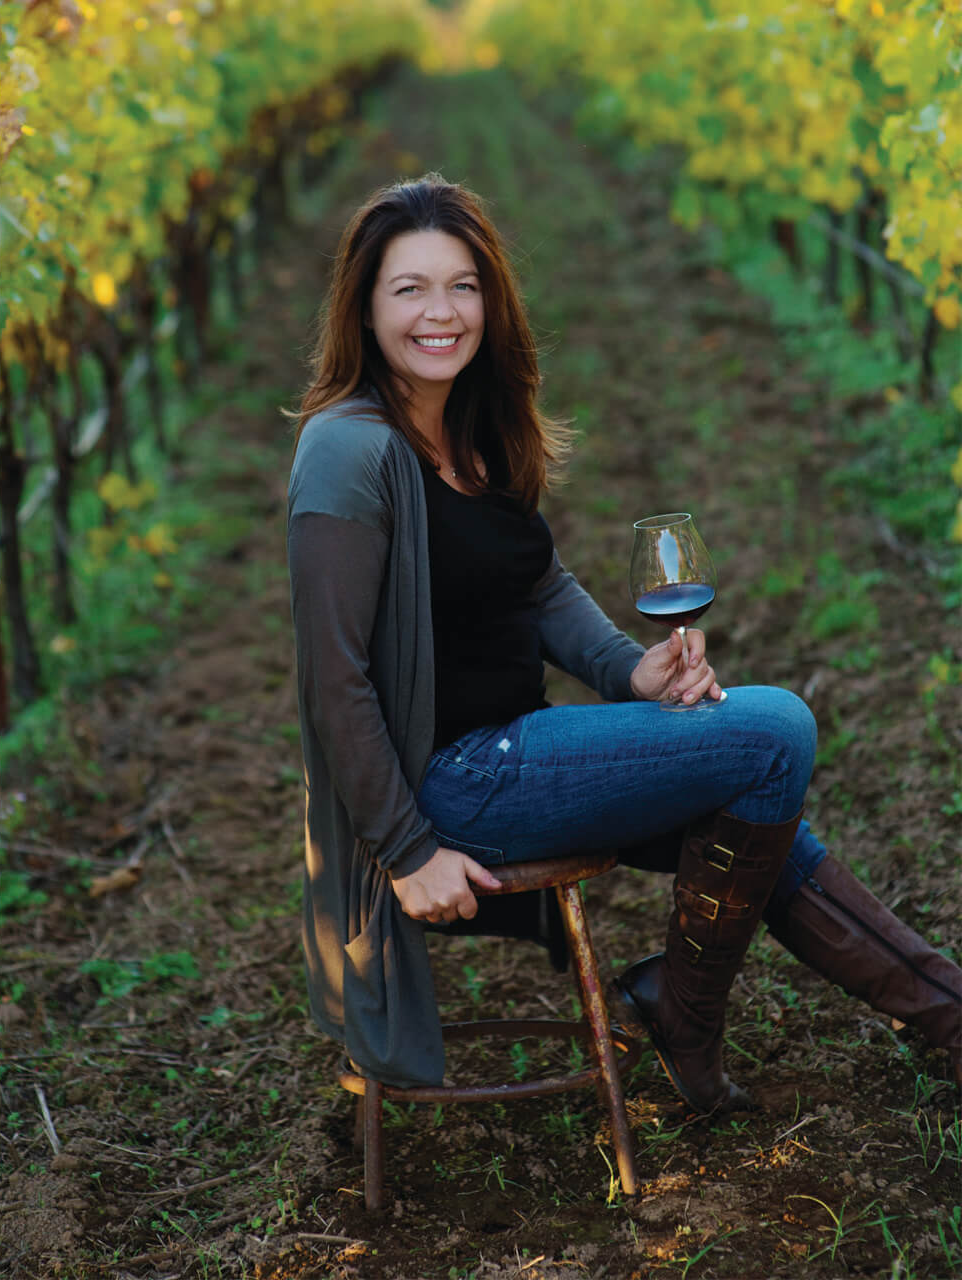 Luisa Ponzi is one of the Six New World Female Winemakers You Should Know